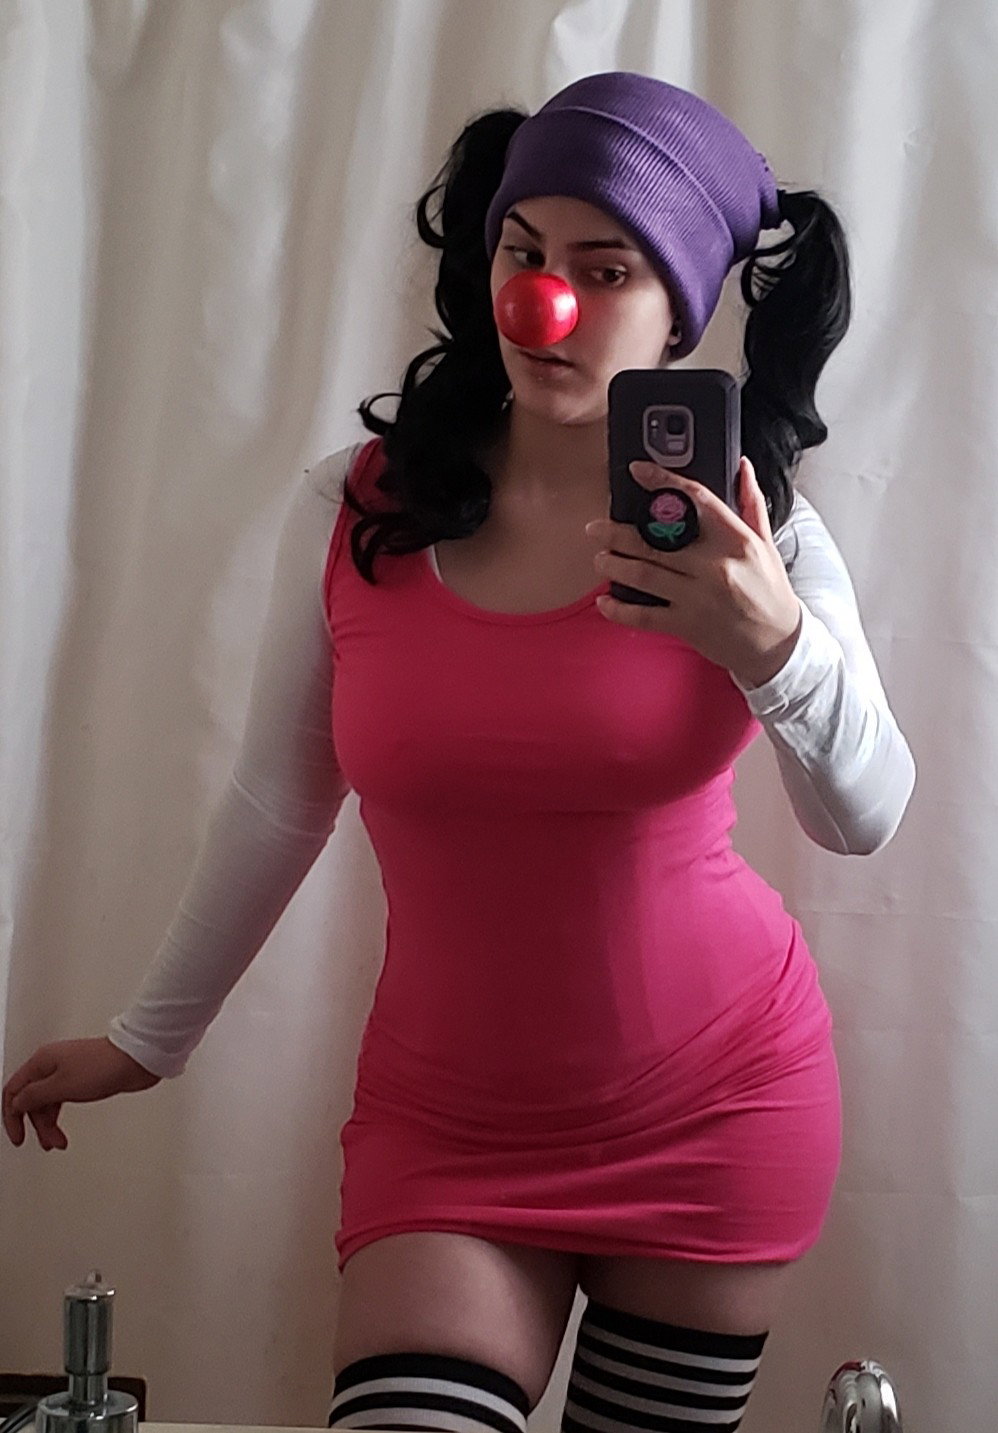 Photo by SynthetikaCosplay with the username @SynthetikaCosplay, who is a star user,  December 10, 2018 at 12:24 AM. The post is about the topic Cosplay and the text says 'Childhood enhanced 😉
Character: Loonette the Clown 
Show: Big Comfy Couch'